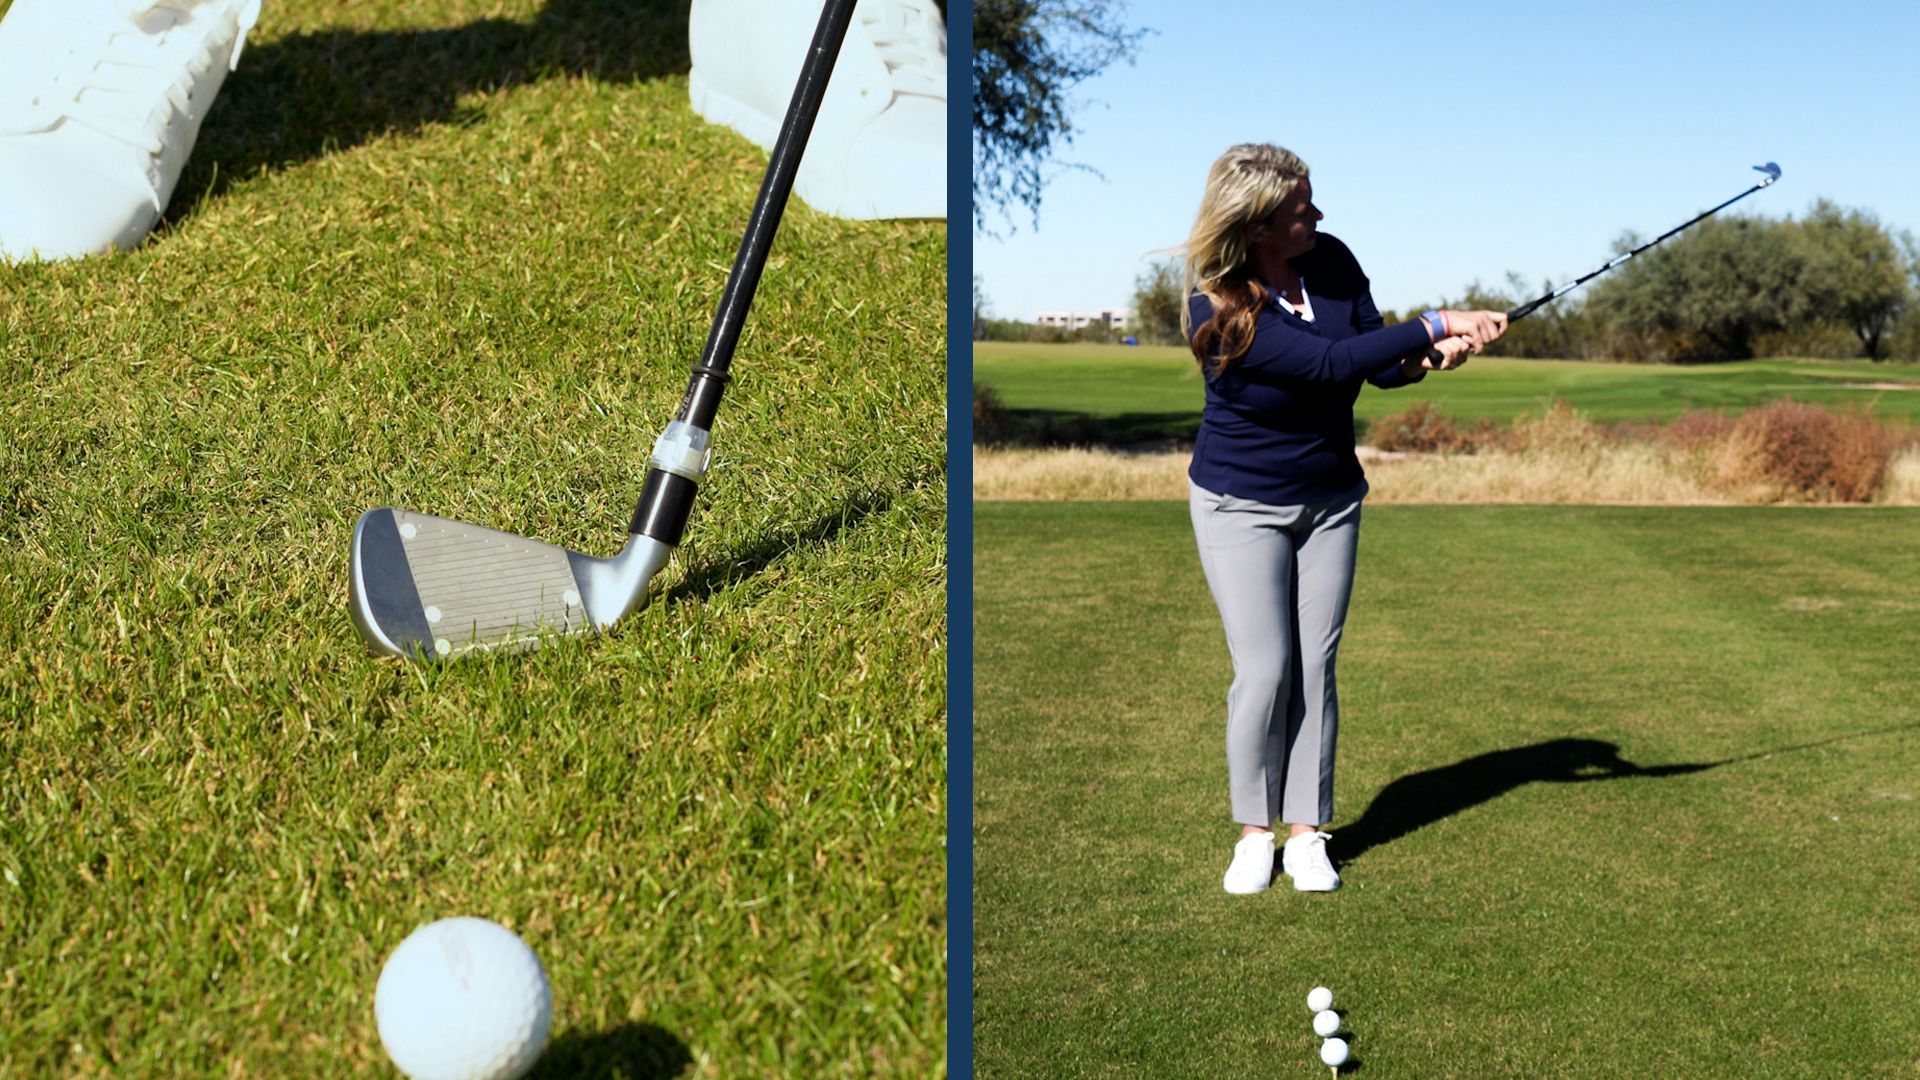 Try this drill to help close your club face